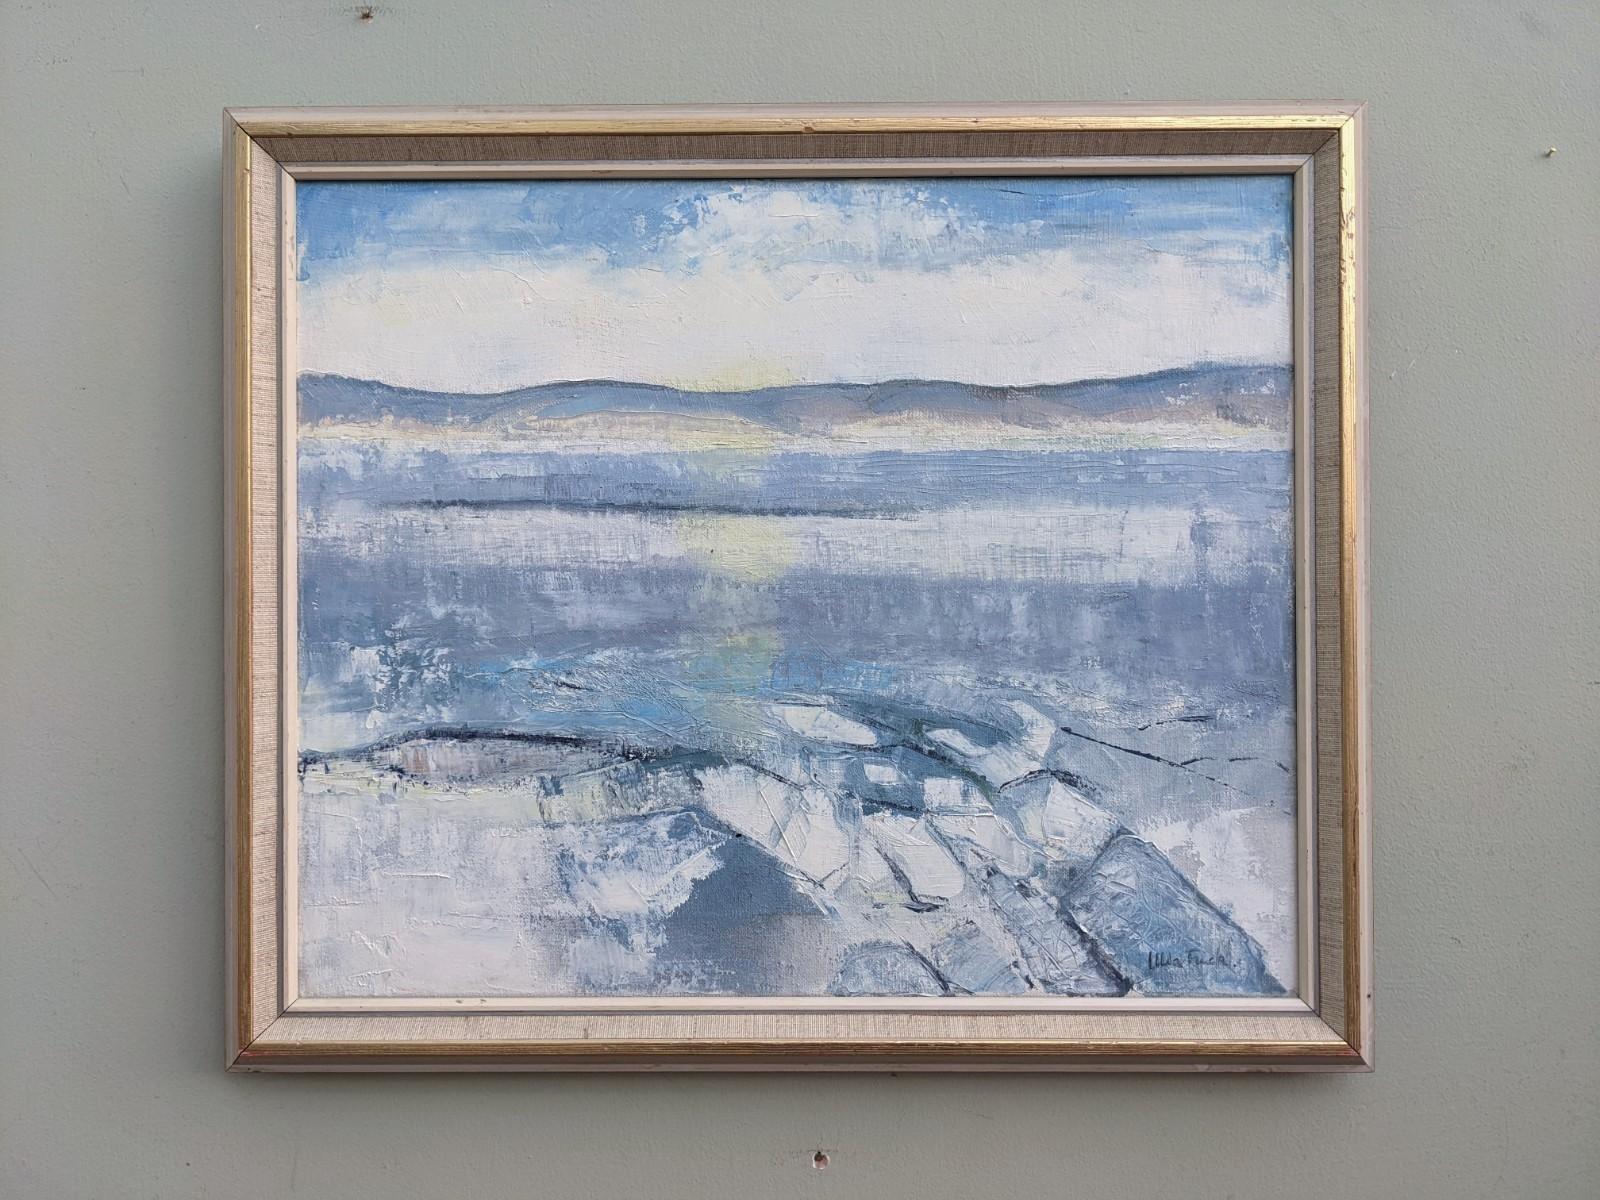 Unknown Abstract Painting - Vintage Mid Century Framed Oil Painting, Abstract Coastal Landscape - Icy Winter